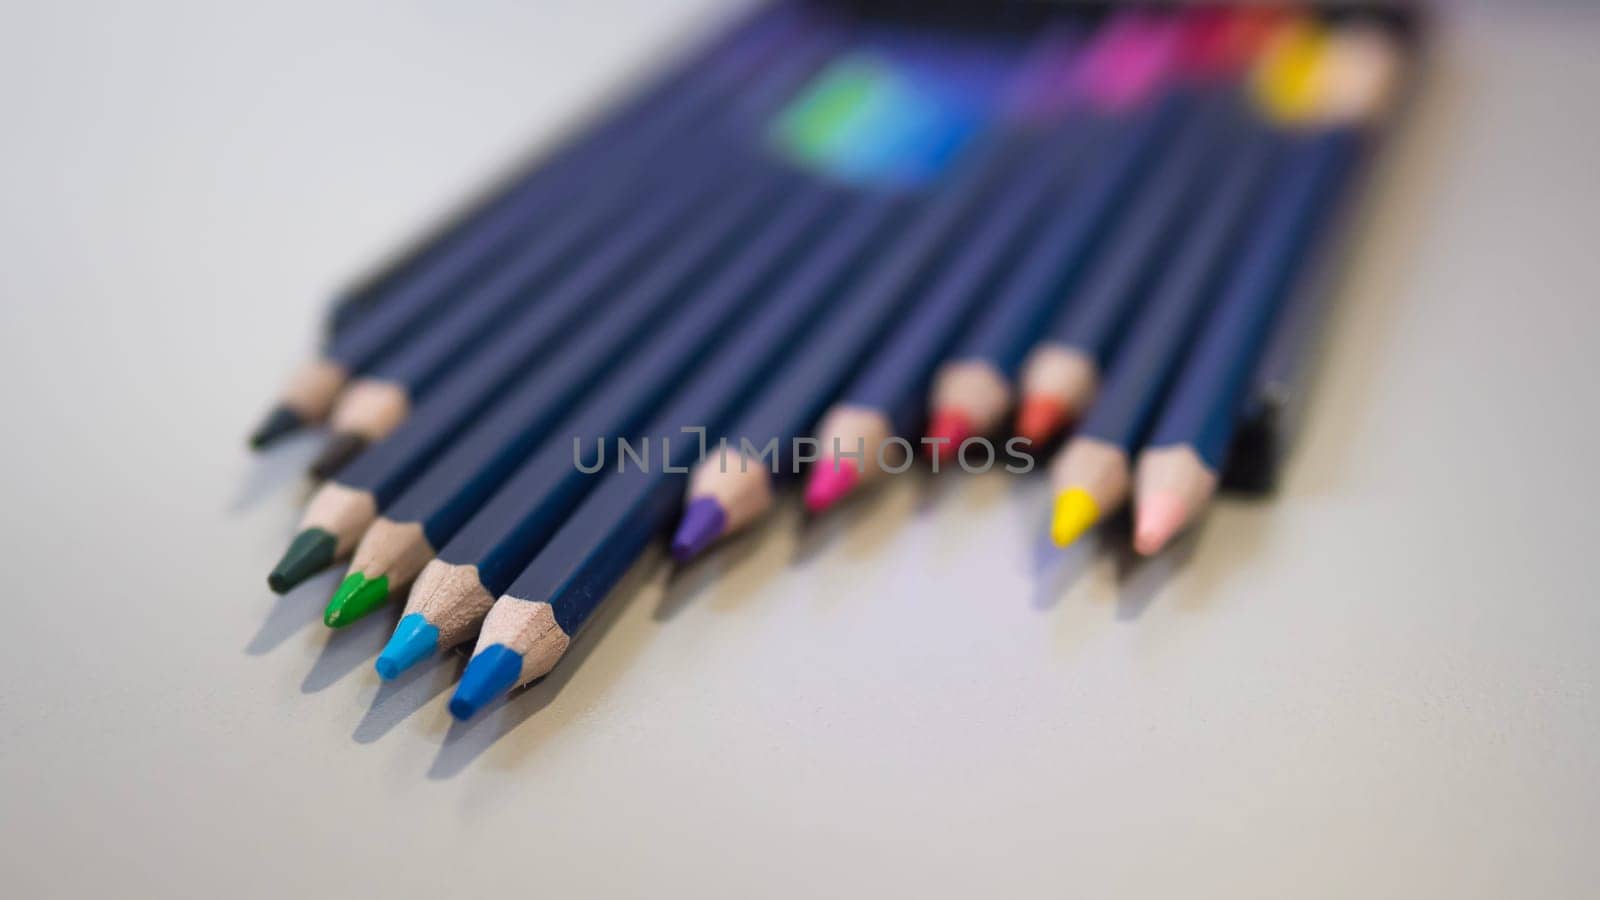 A variety of colored pencils are neatly arranged in a row on a table, resembling a colorful array of office supplies